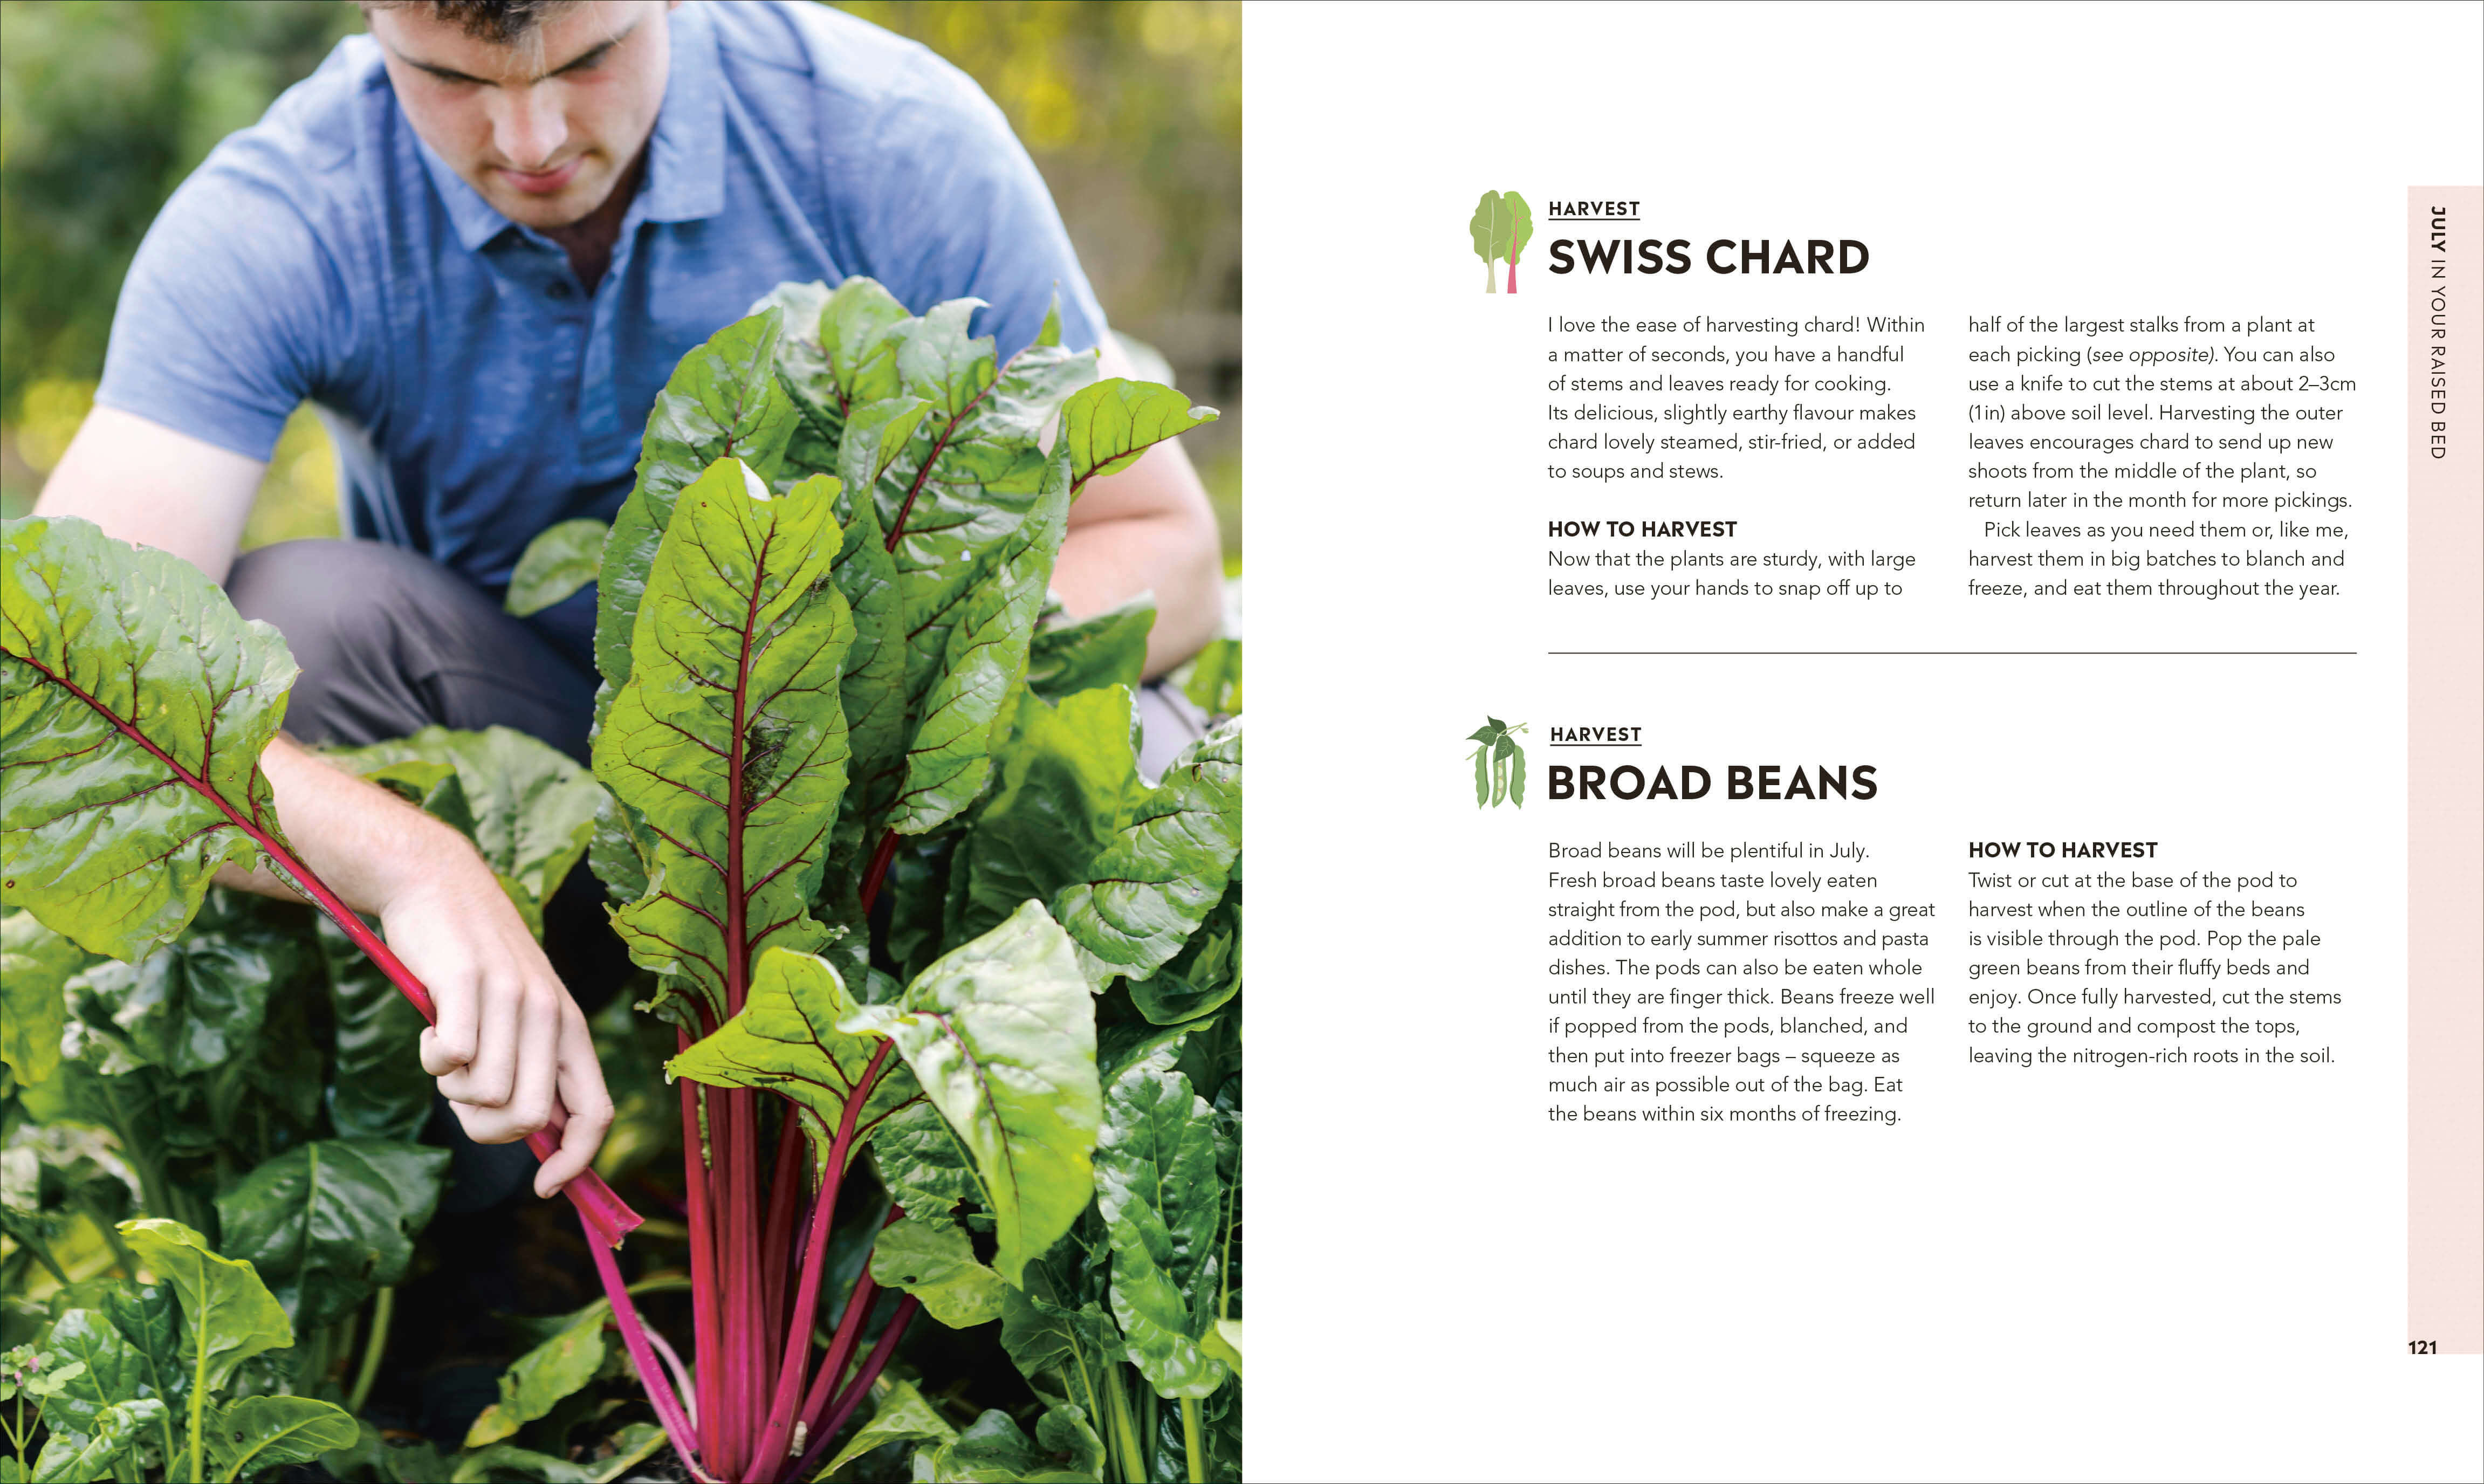 Veg In One Bed | Gardening Book | by Huw Richards - Lifestory - Bookspeed